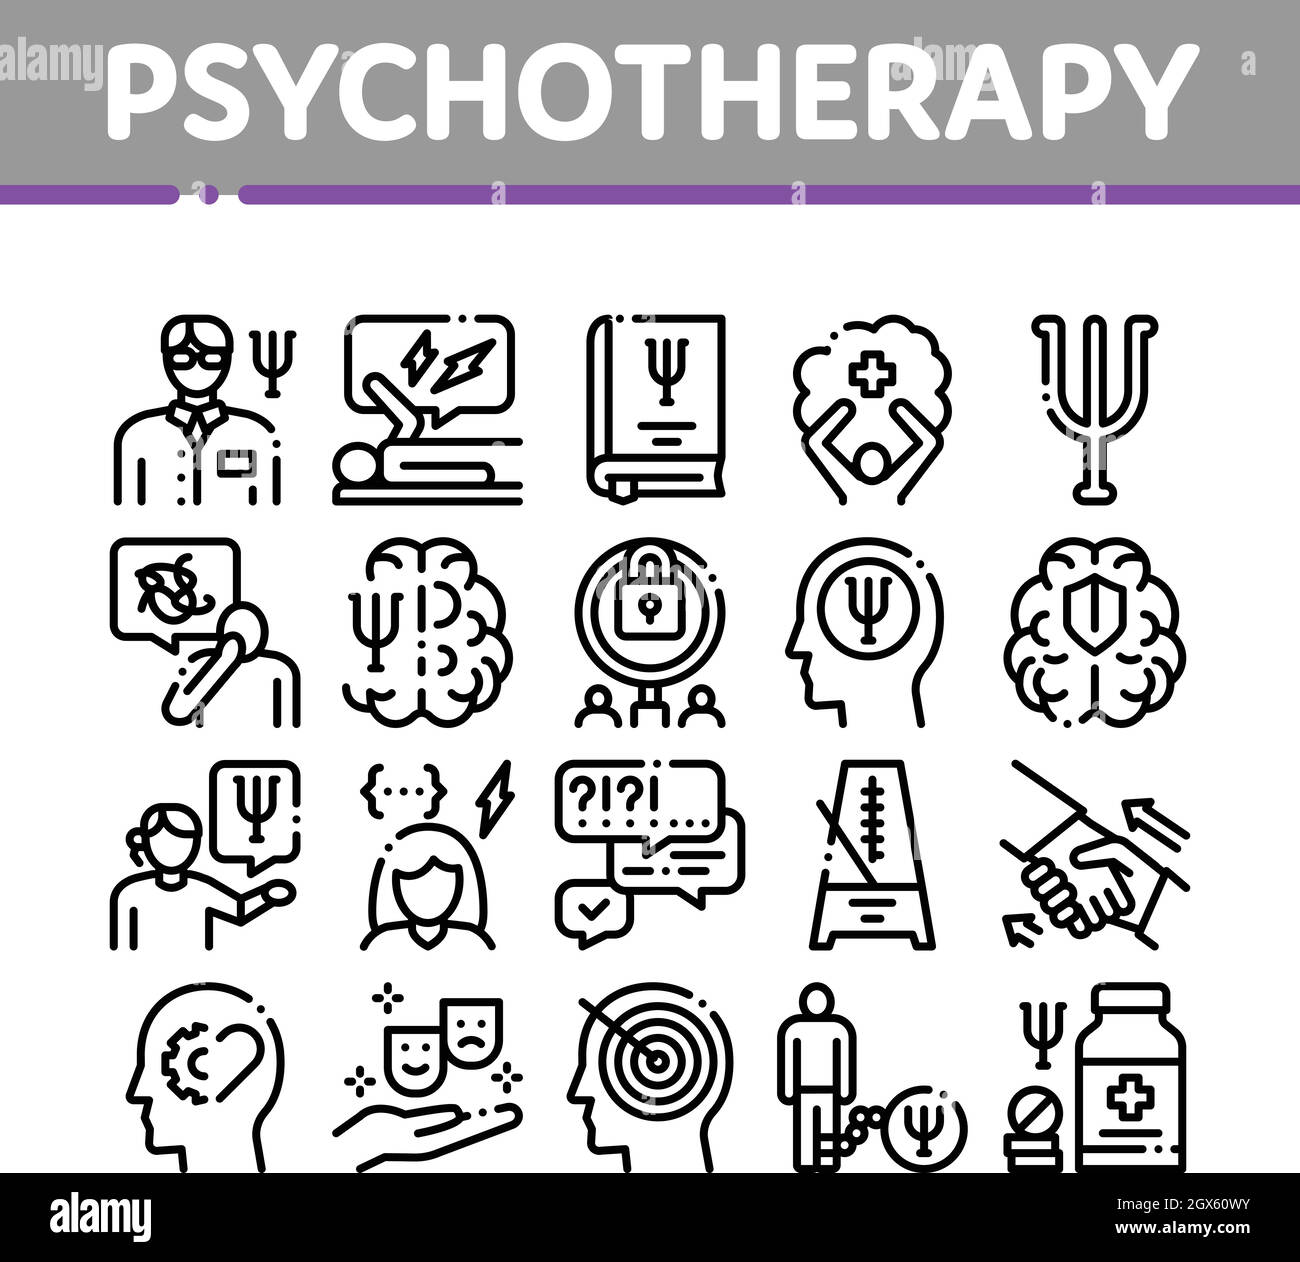 Psychotherapy Help Collection Icons Set Vector Stock Vector